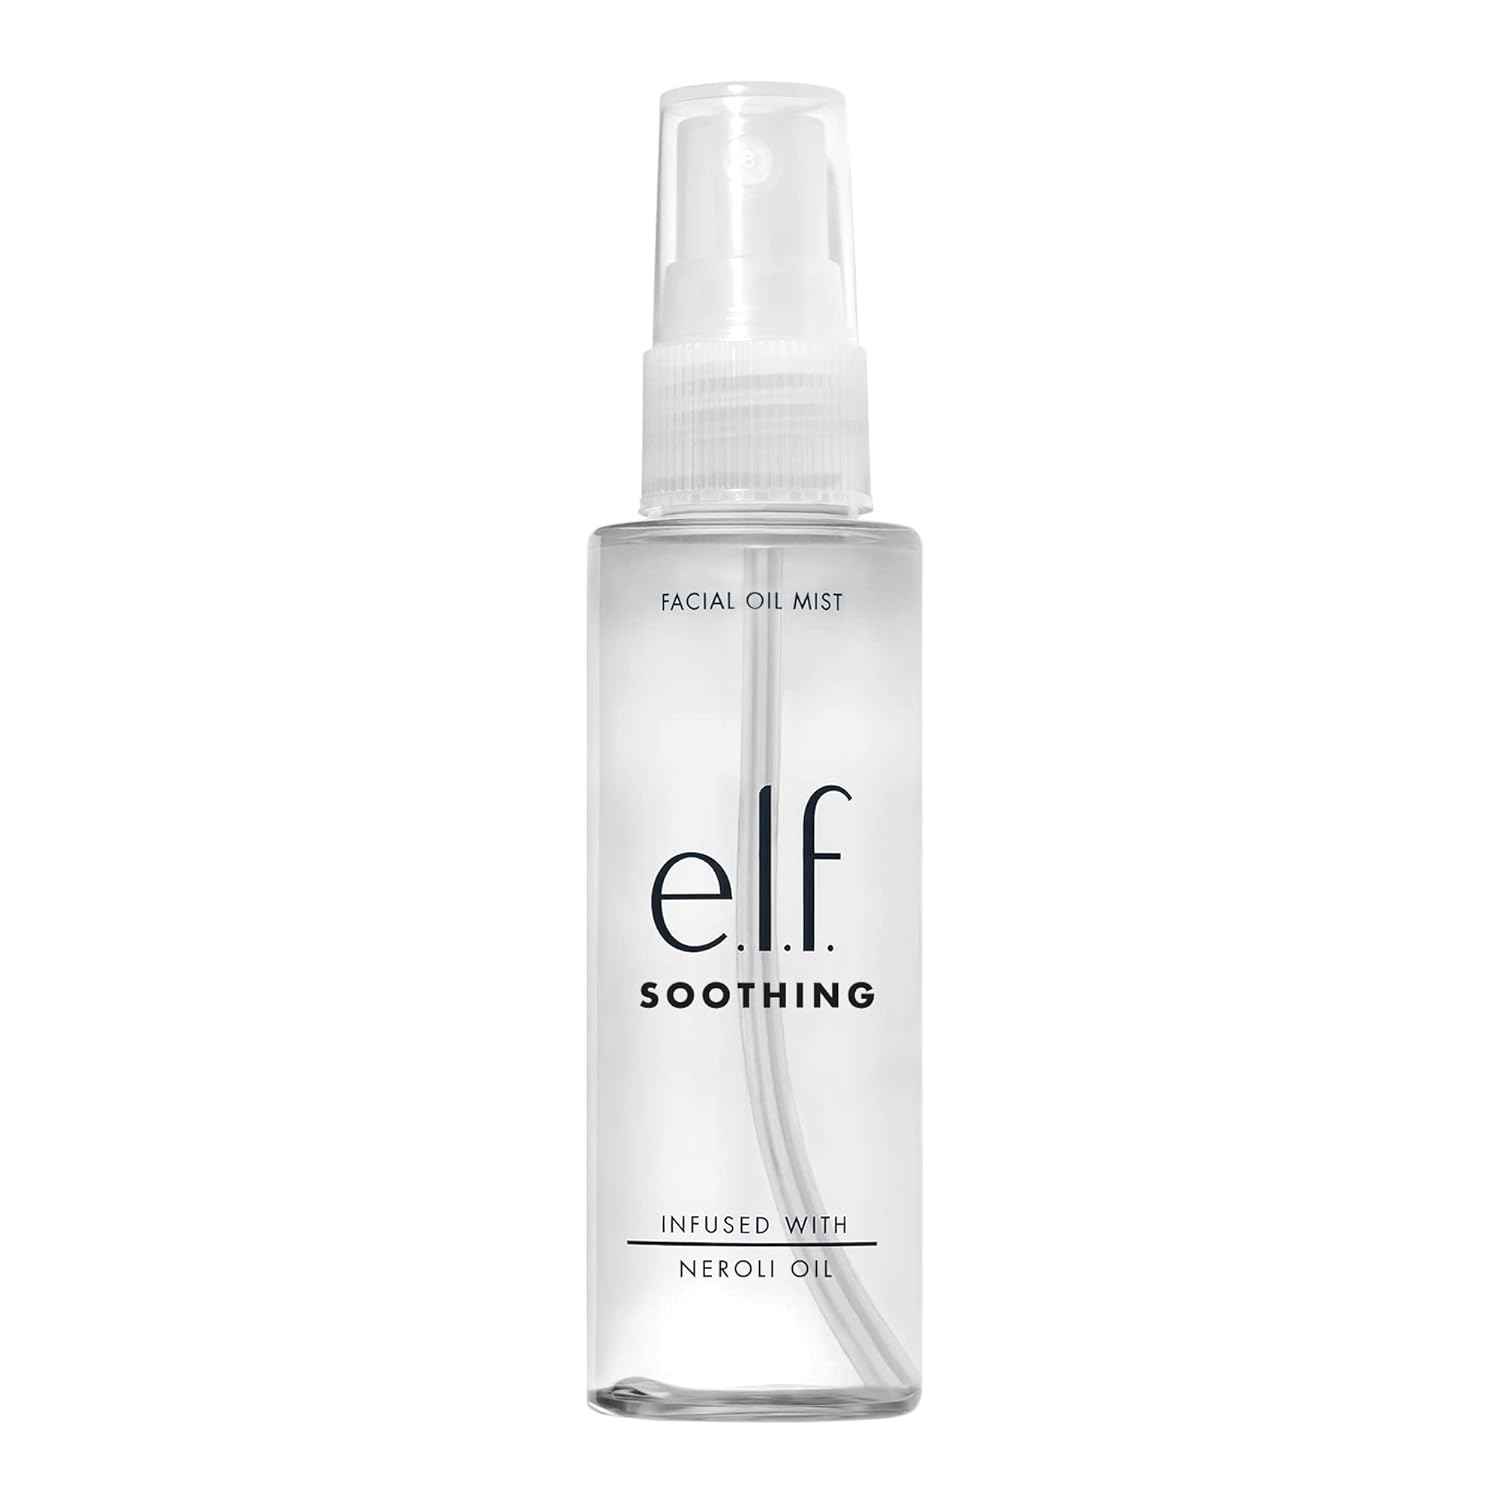 e.l.f. Soothing Facial Oil Mist, Essential Oil-infused Facial Mist, Soothes The Mind, Refreshing Mood Booster, Vegan & Cruelty-Free, 2.02